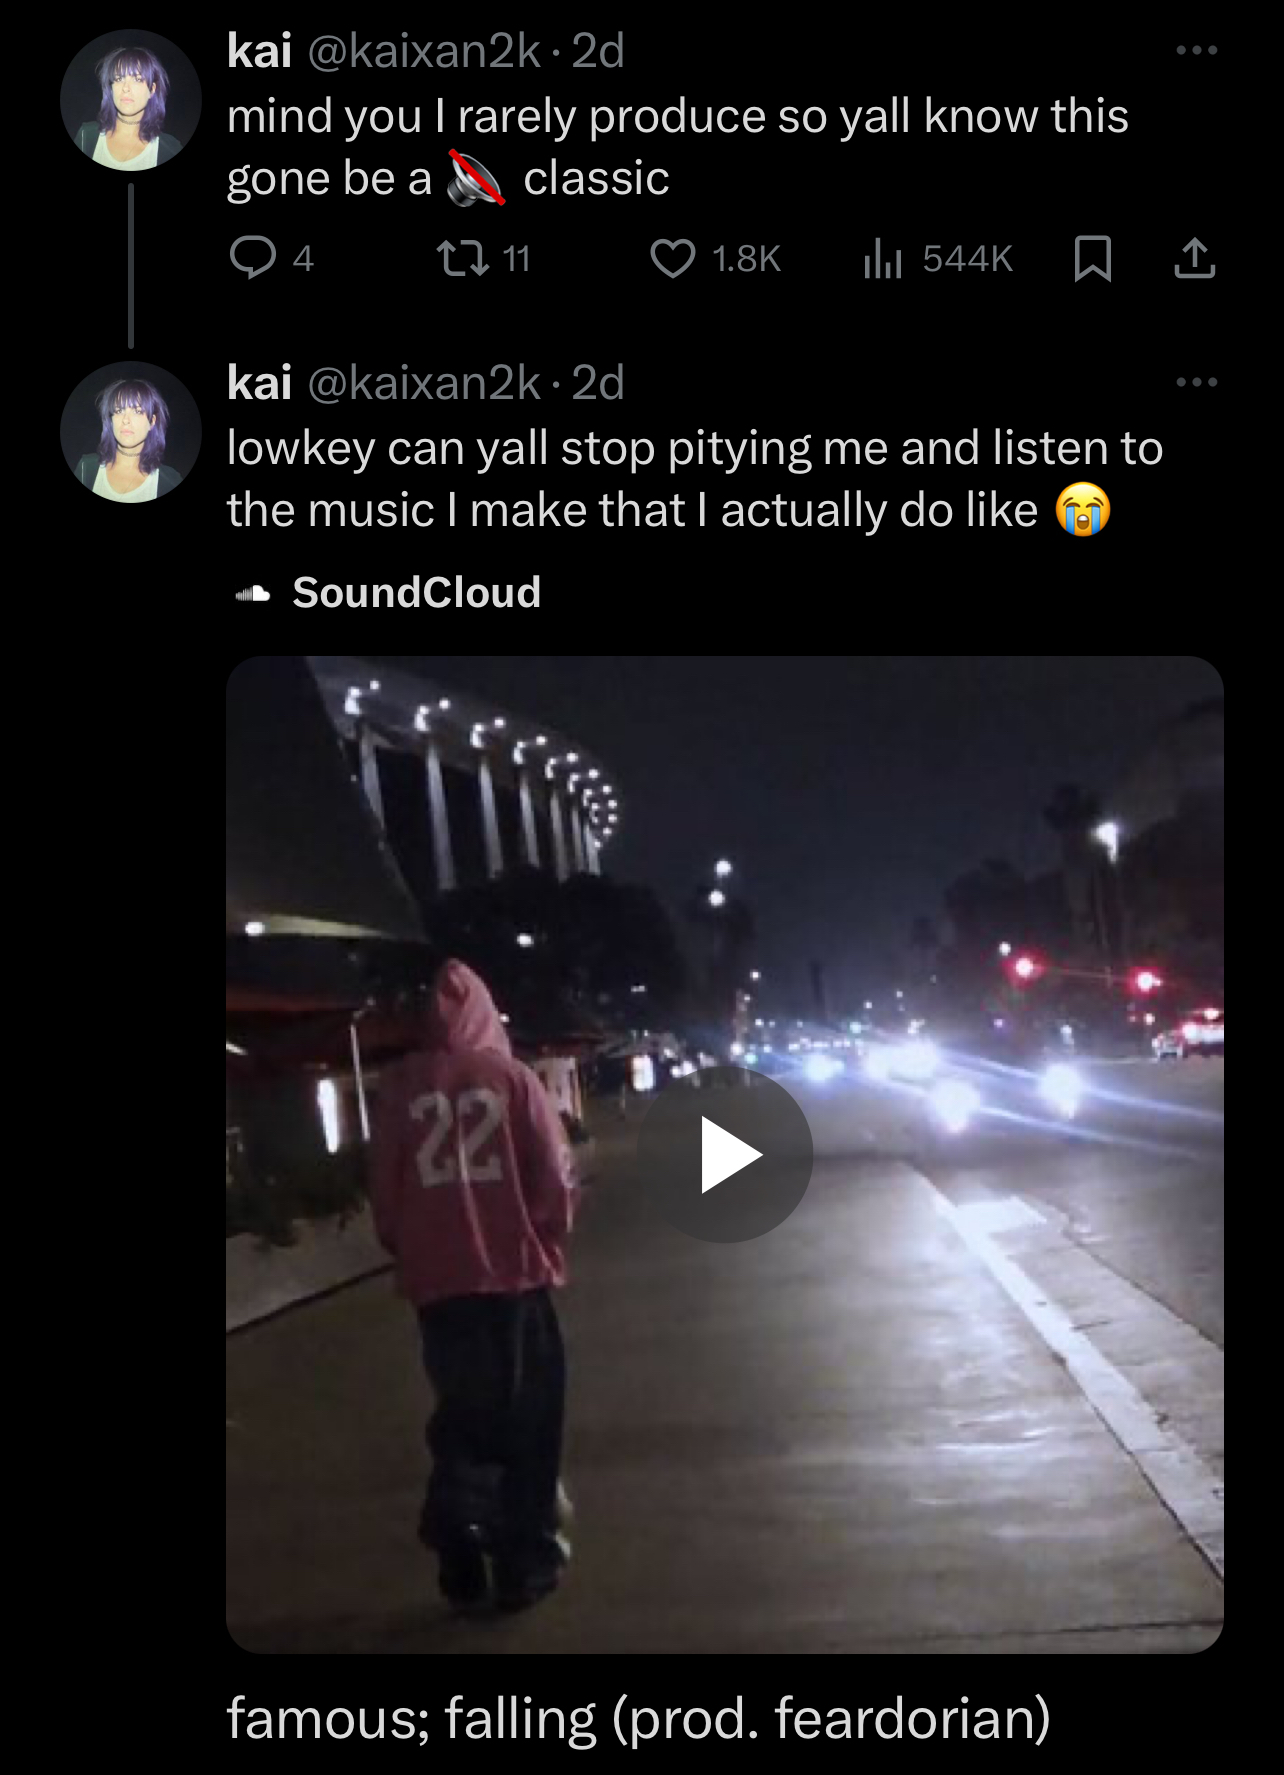 Individual in hoodie standing on a street at night, with a sentimental expression, linked to a SoundCloud music track